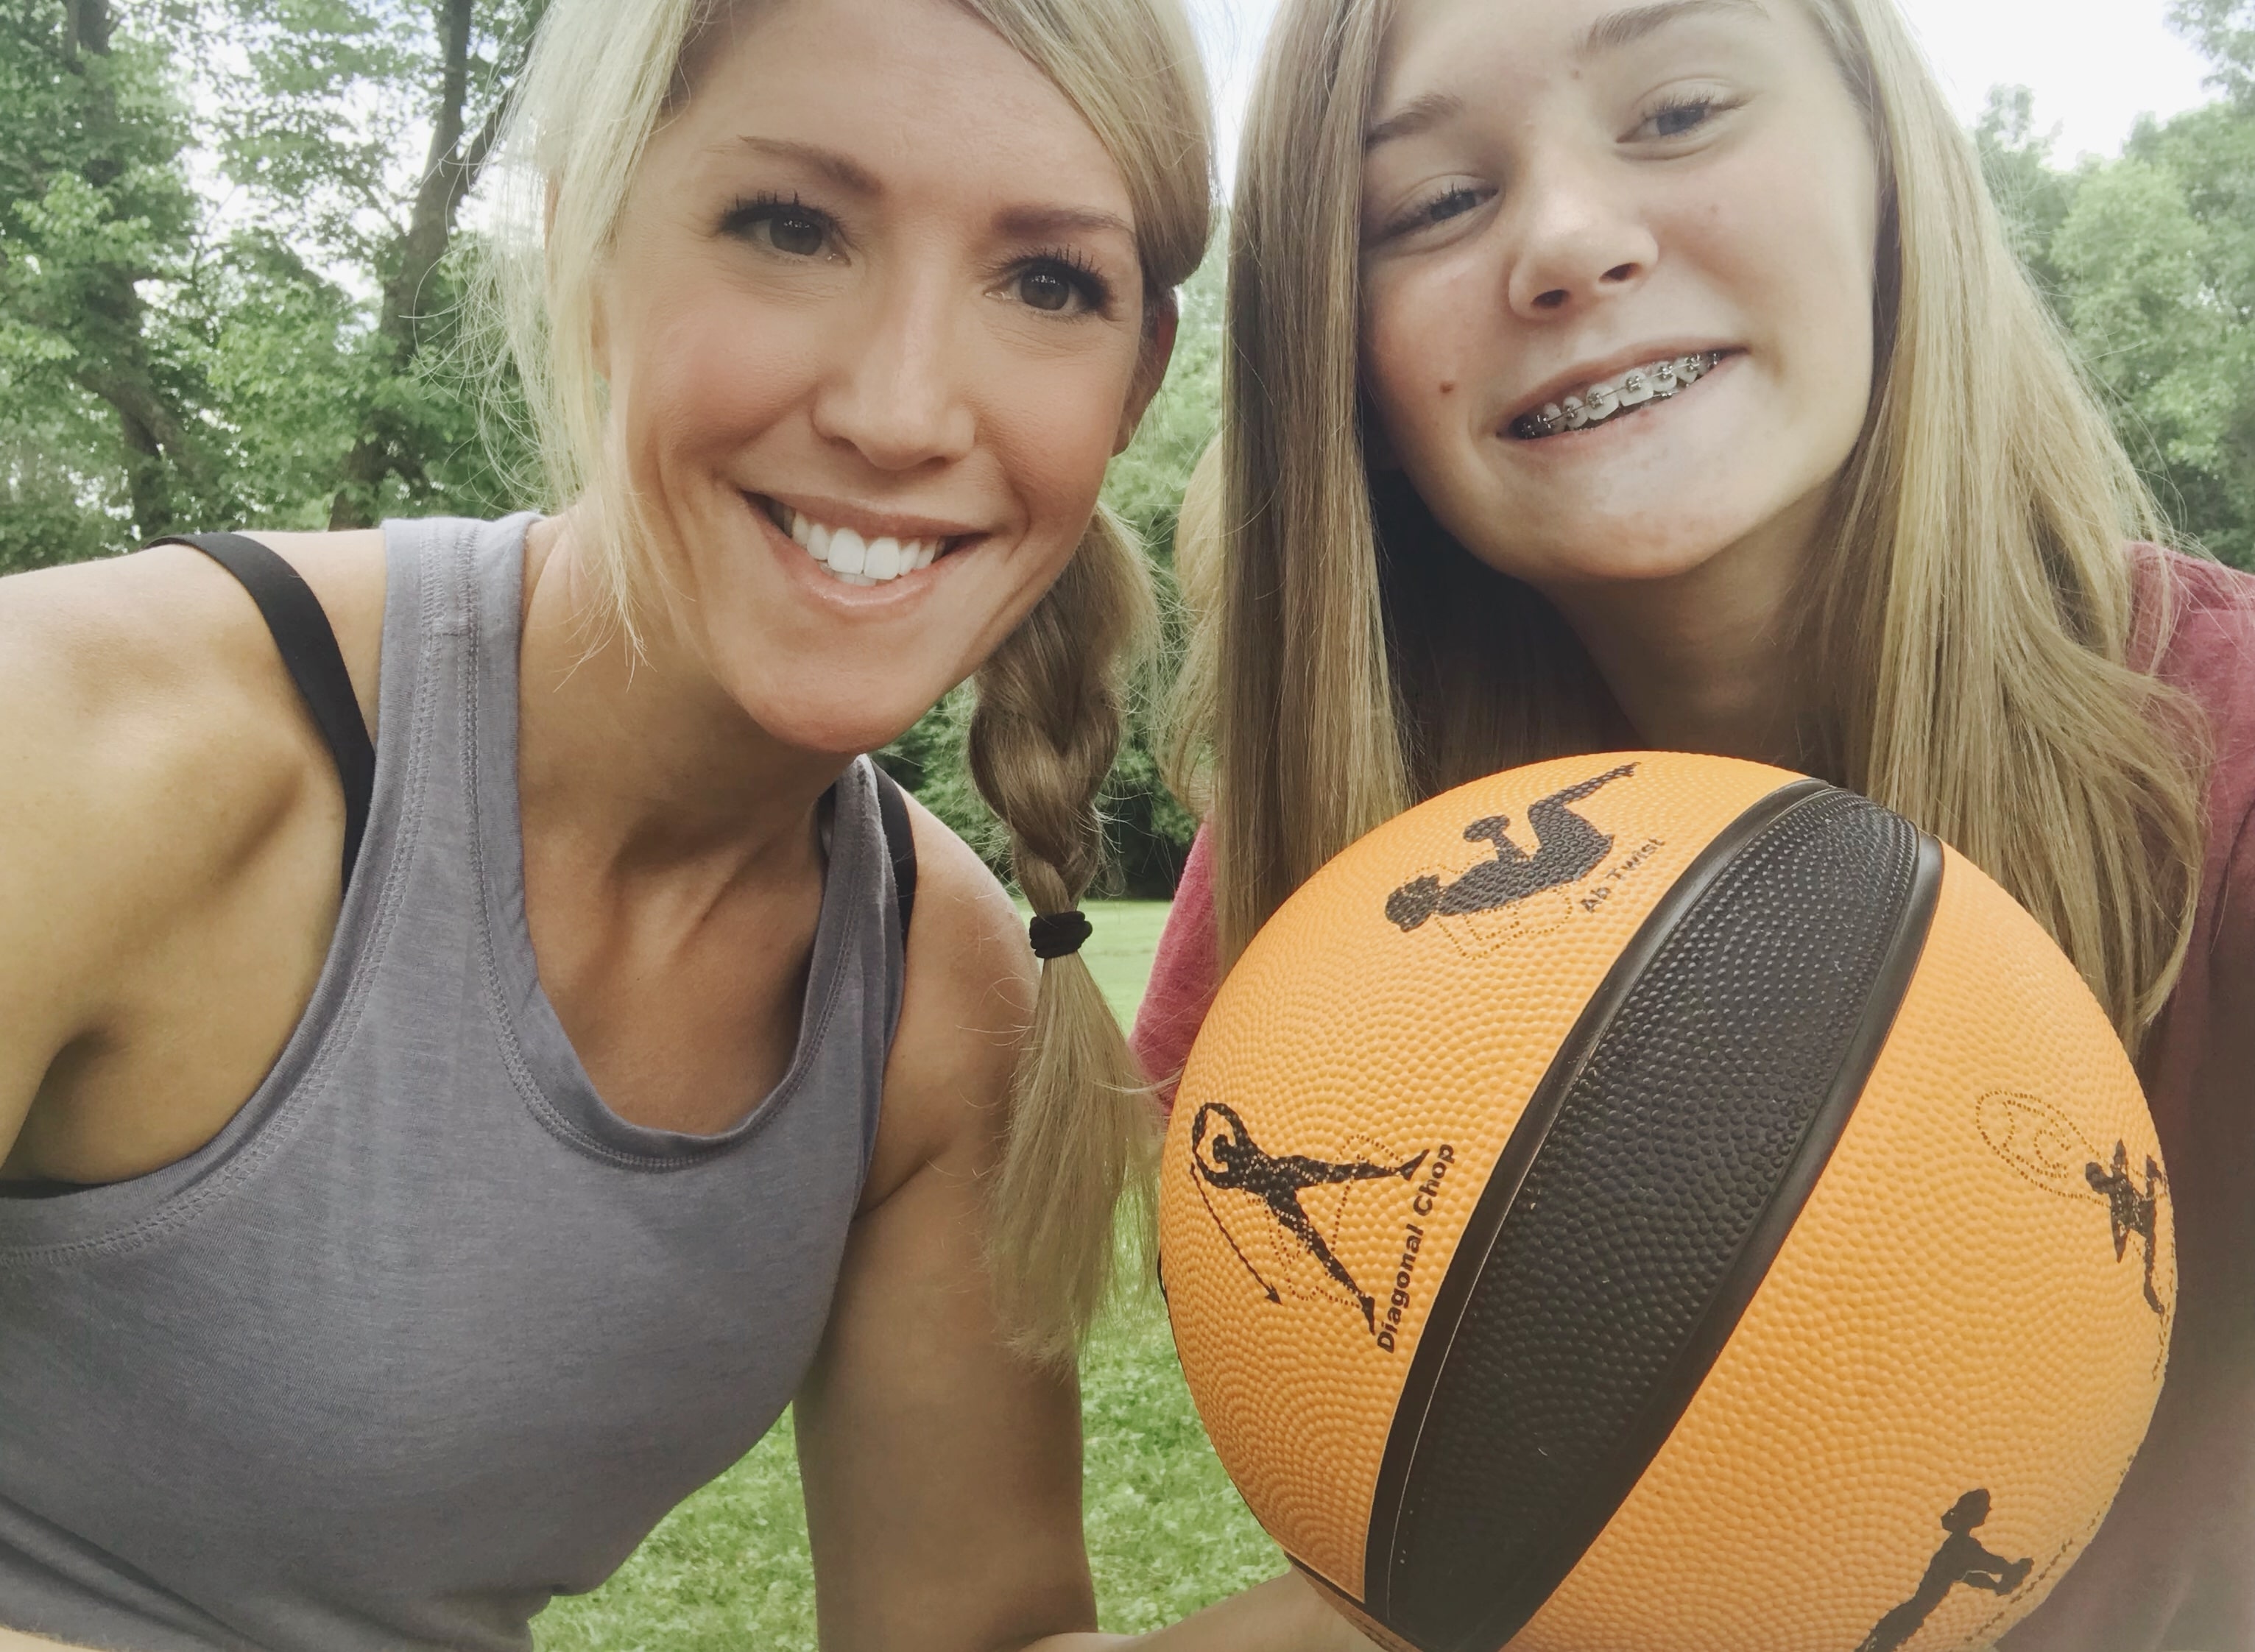 Mom and Daughter pose for a selfie post workout with Smart Medicine Ball